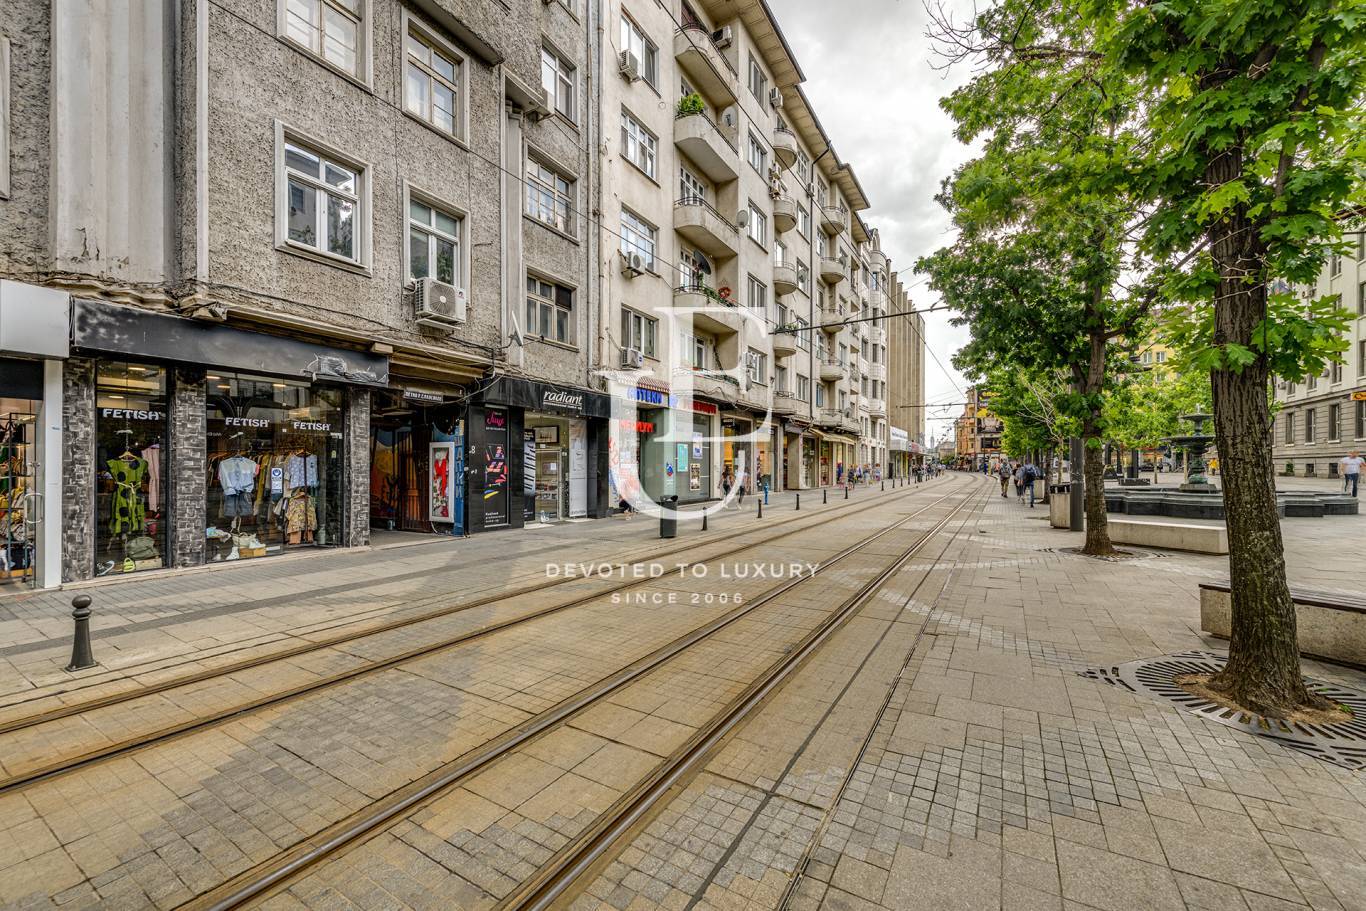 Office for sale in Sofia, Downtown with listing ID: K10867 - image 1